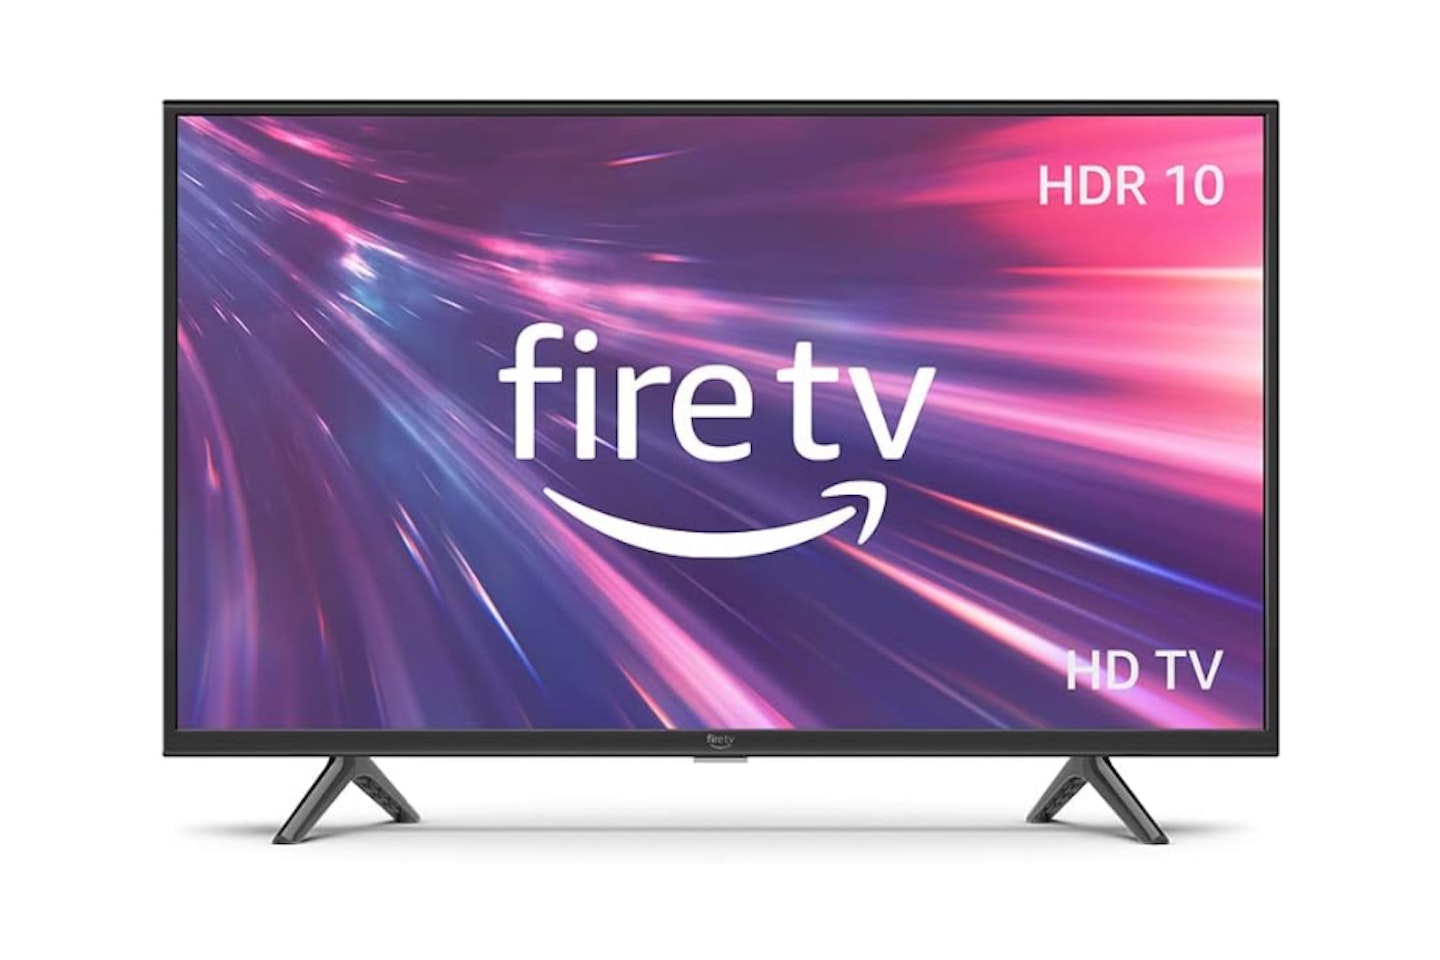  Amazon Fire TV 32-inch 2-Series  - one of the best 32" TVs